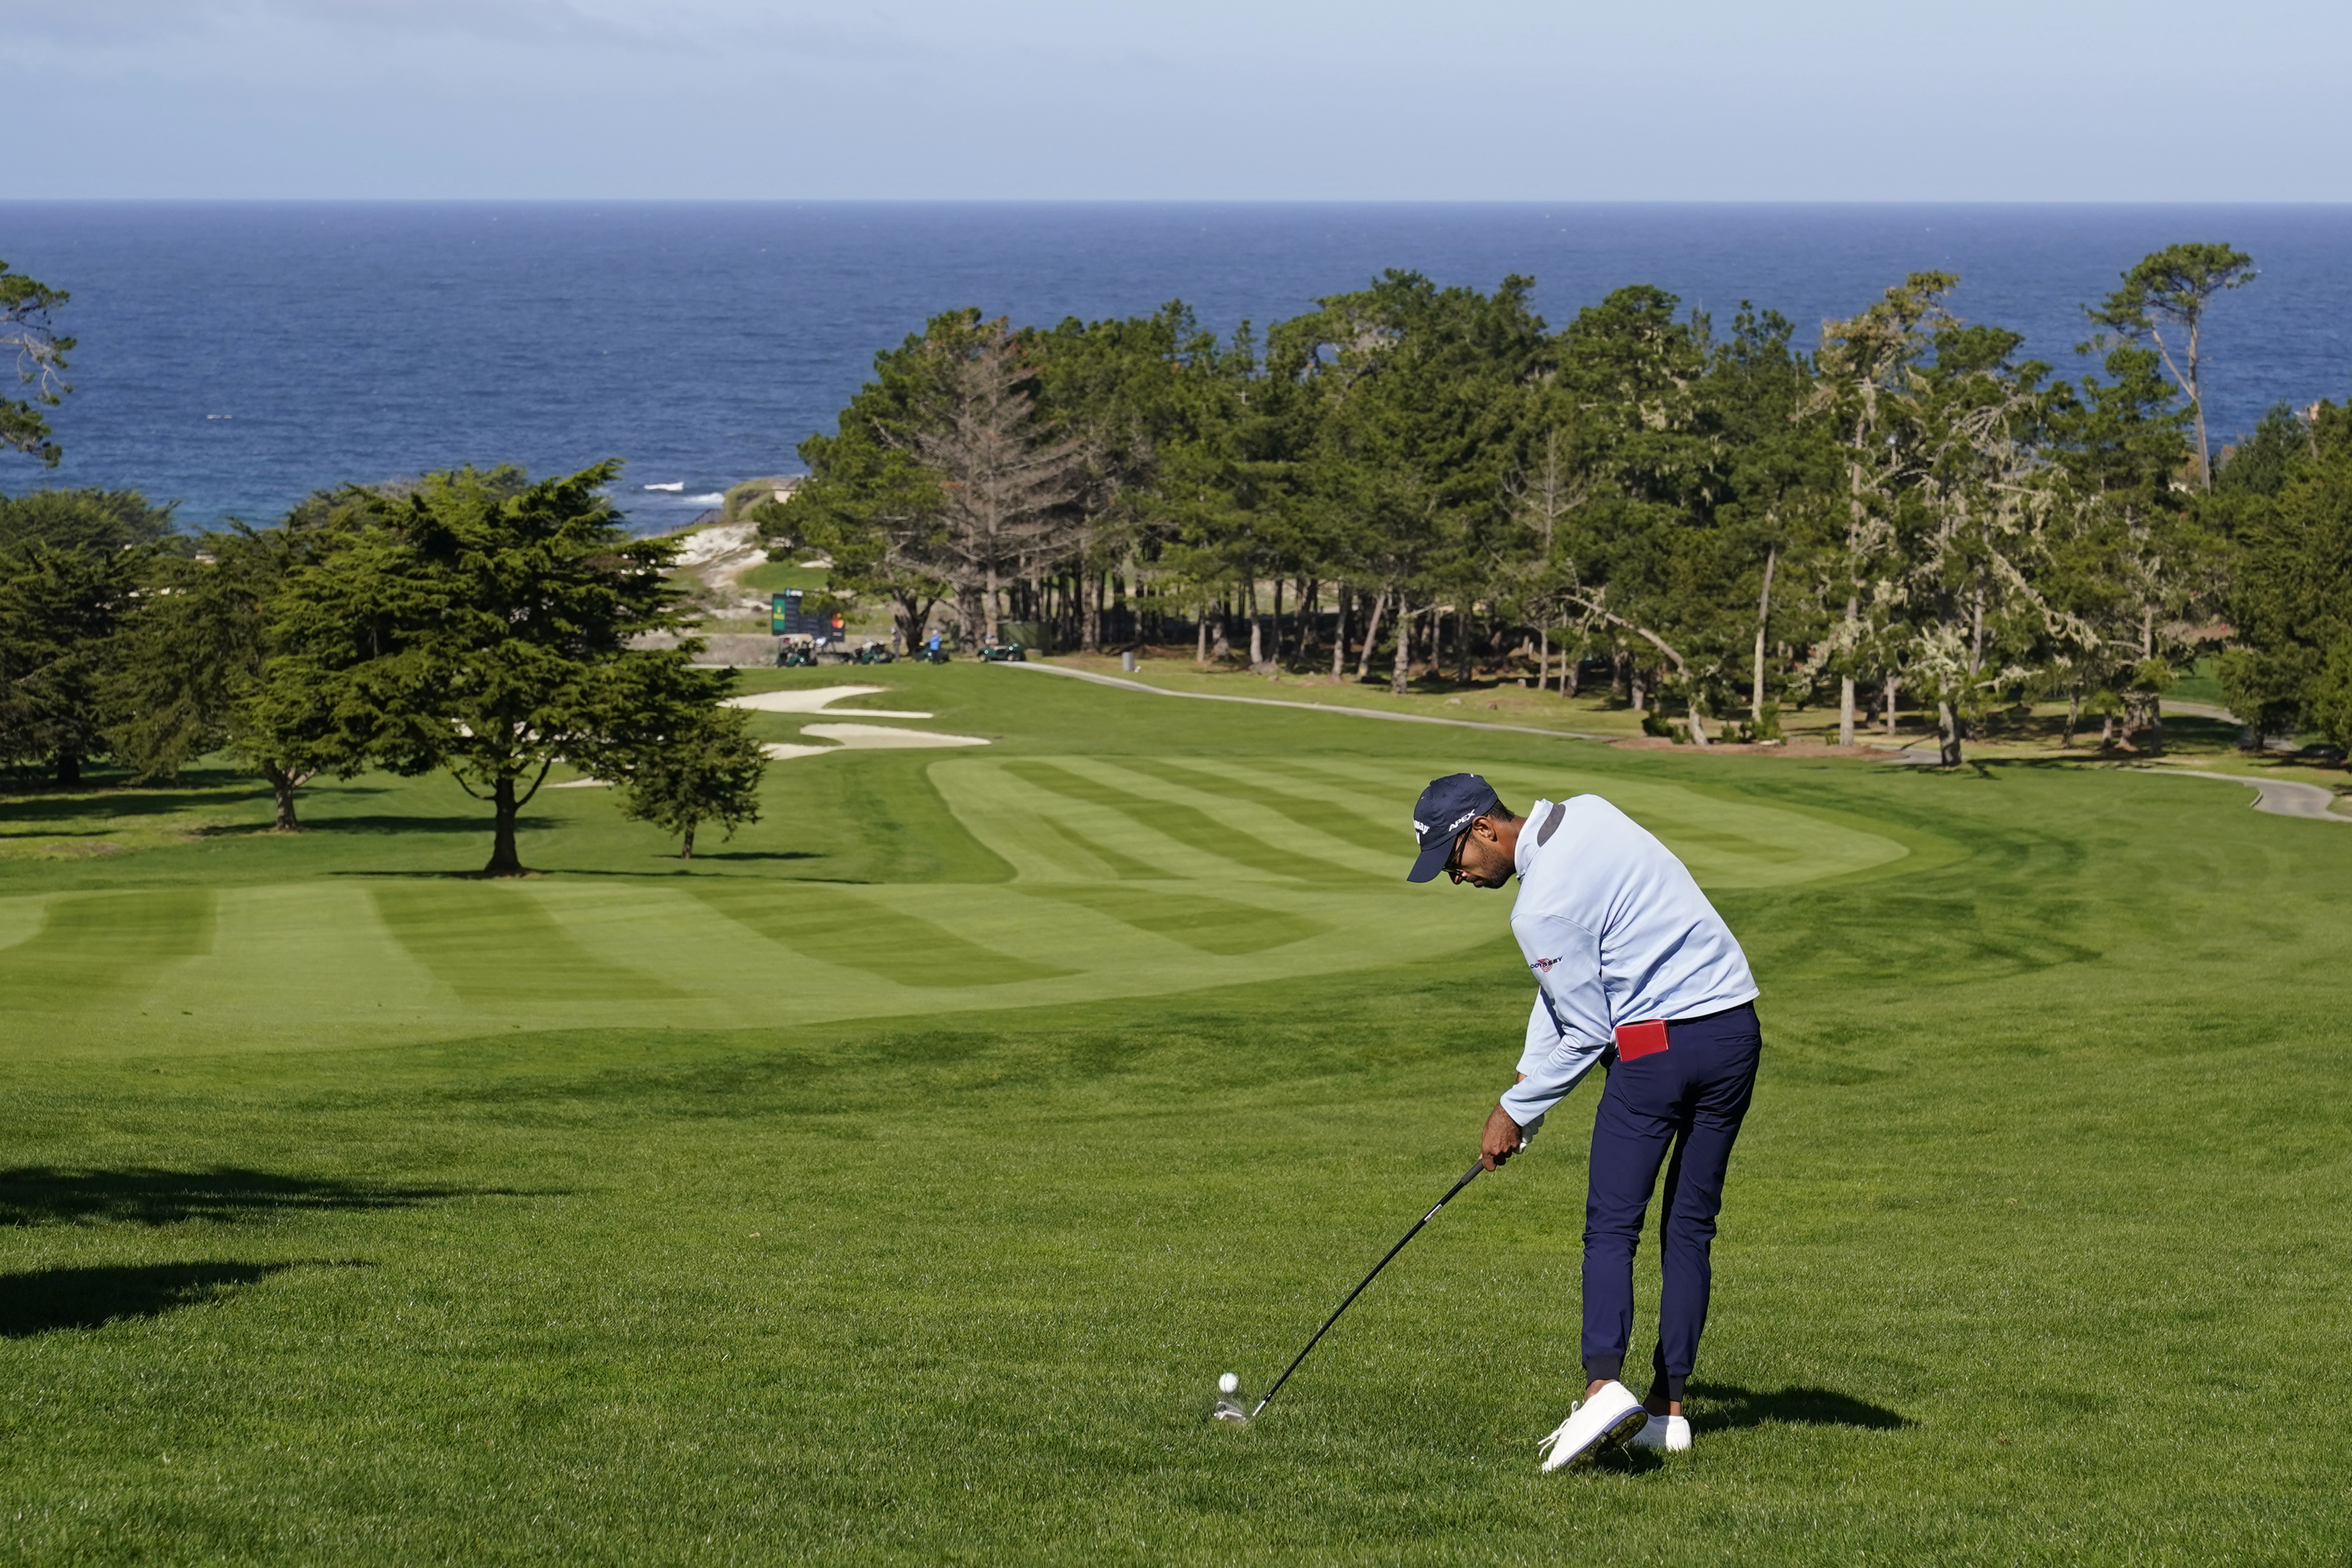 How to watch AT&T Pebble Beach Pro-Am, Round 3 & Round 4 (2/13-2/14) | TV  Chanel, Live Stream, Time - mlive.com